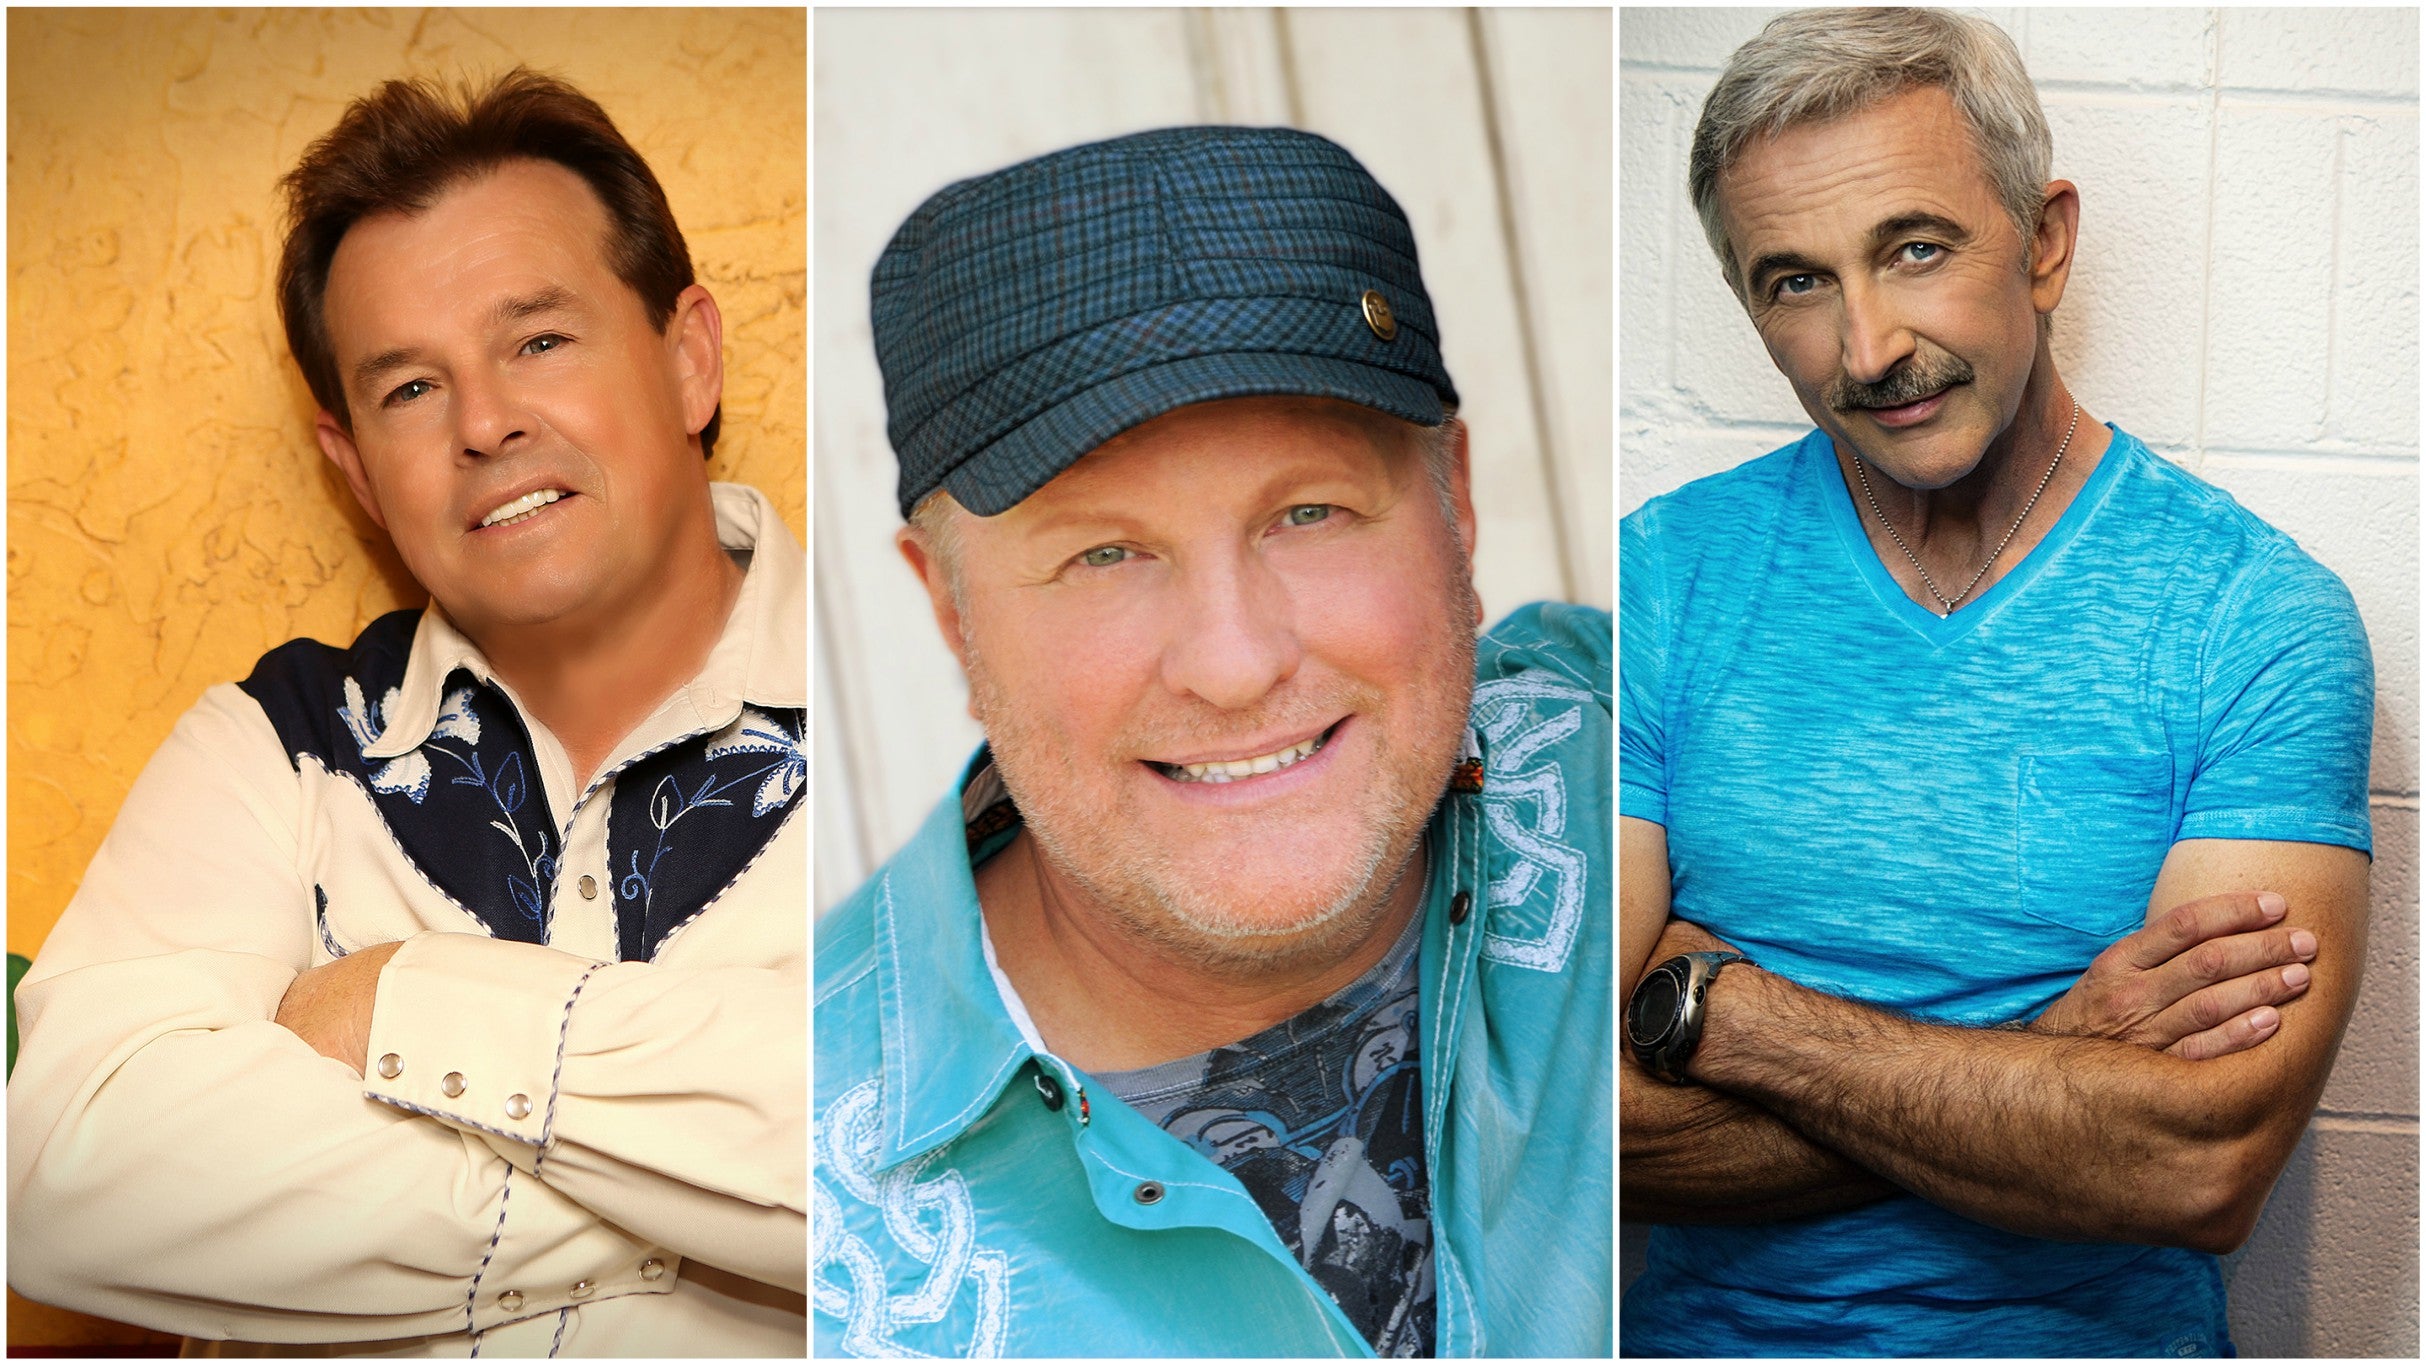 Roots and Boots - Aaron Tippin, Collin Raye, and Sammy Kershaw in Mashantucket promo photo for Venue presale offer code